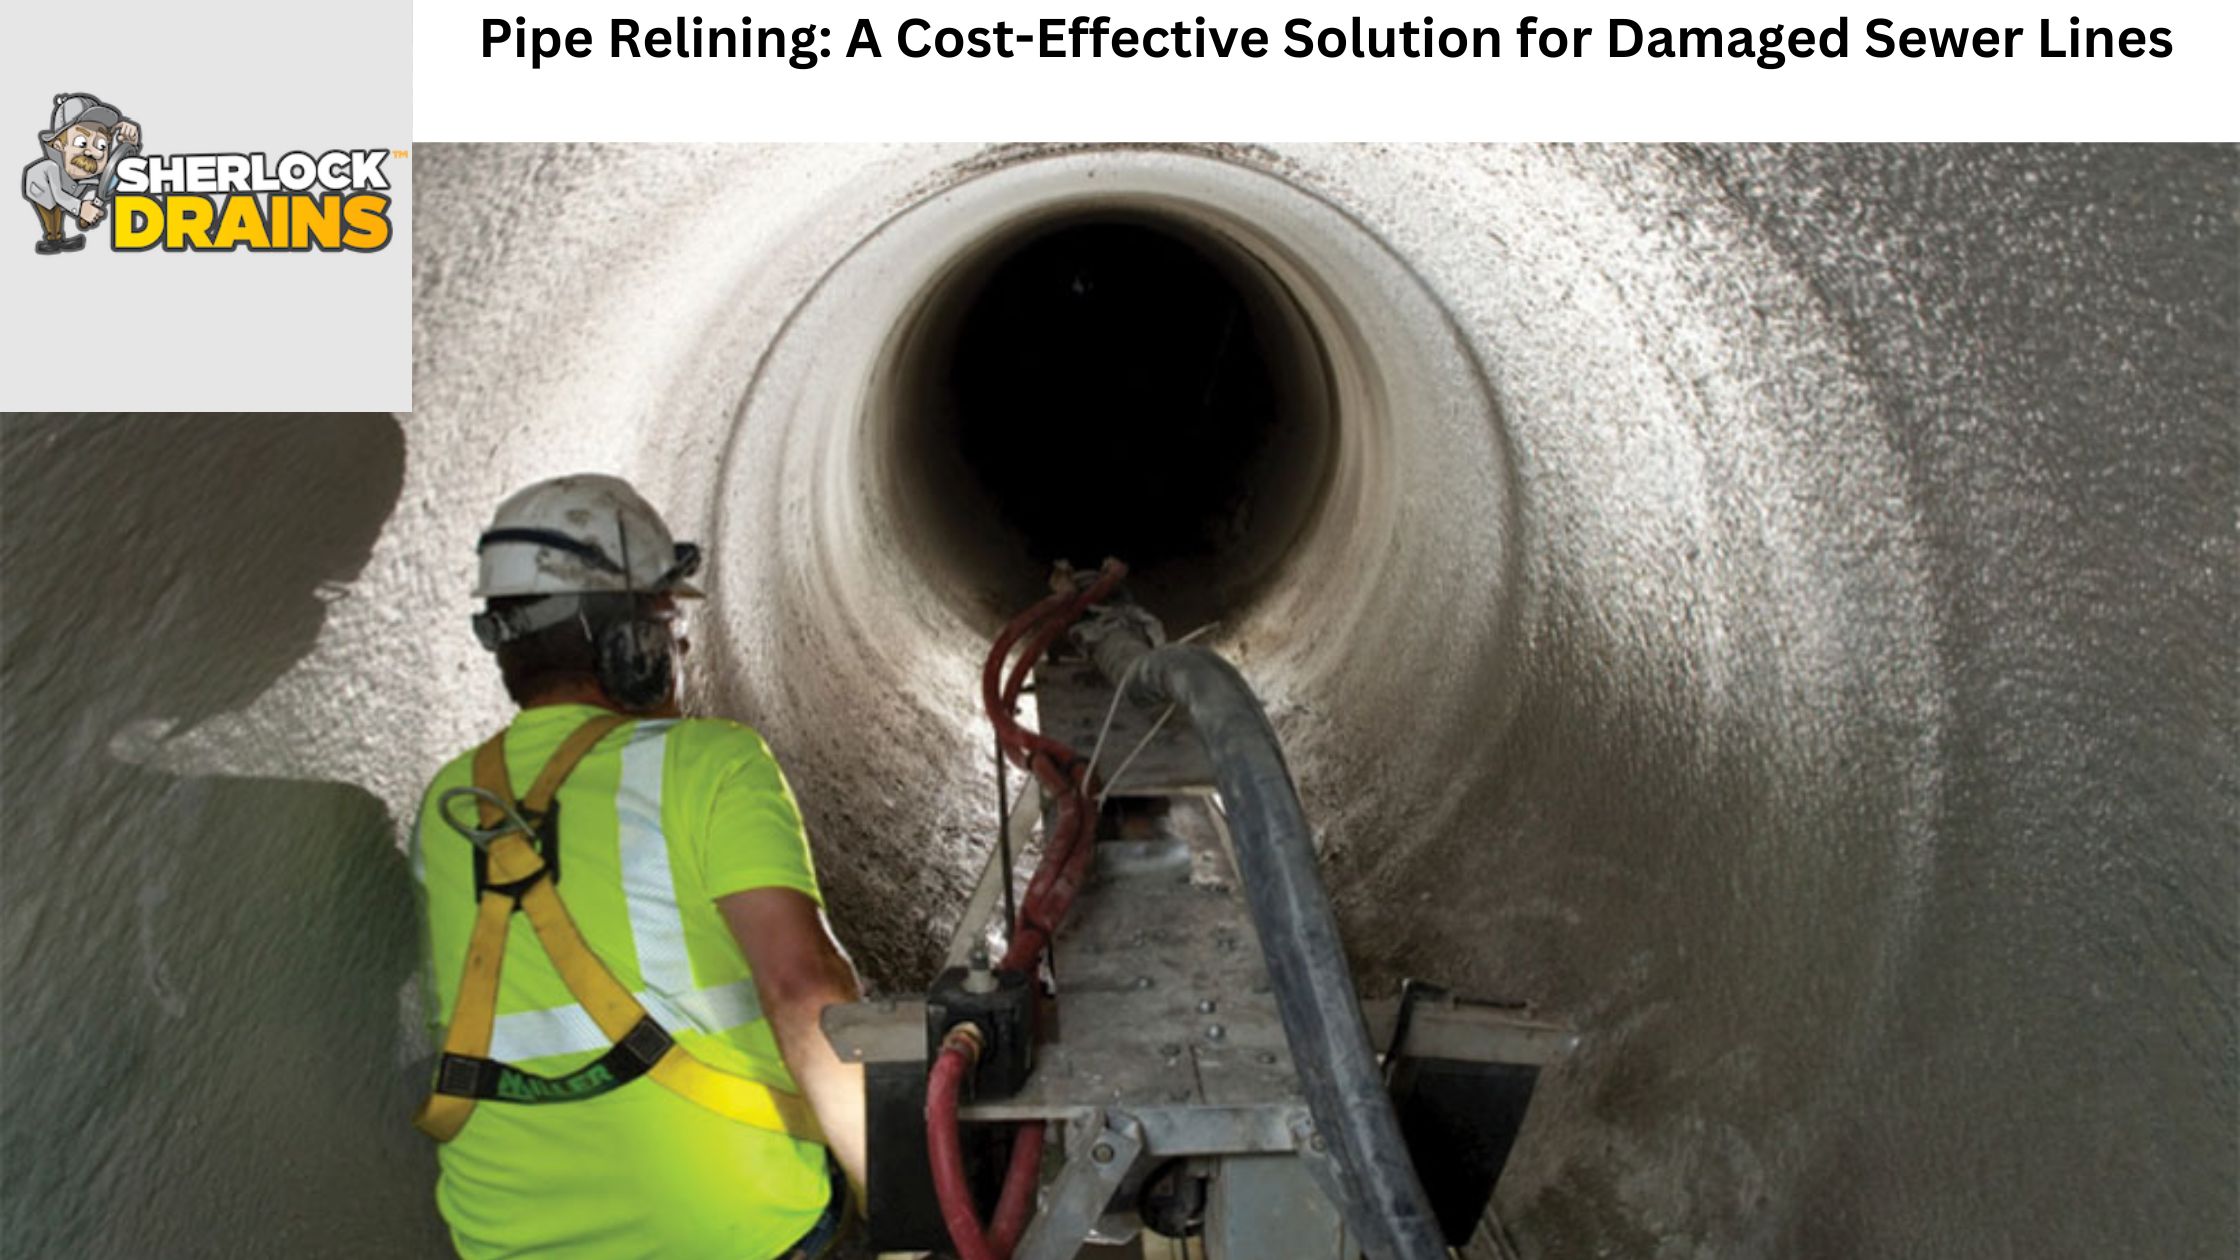 Pipe Relining: A Cost-Effective Solution for Damaged Sewer Lines